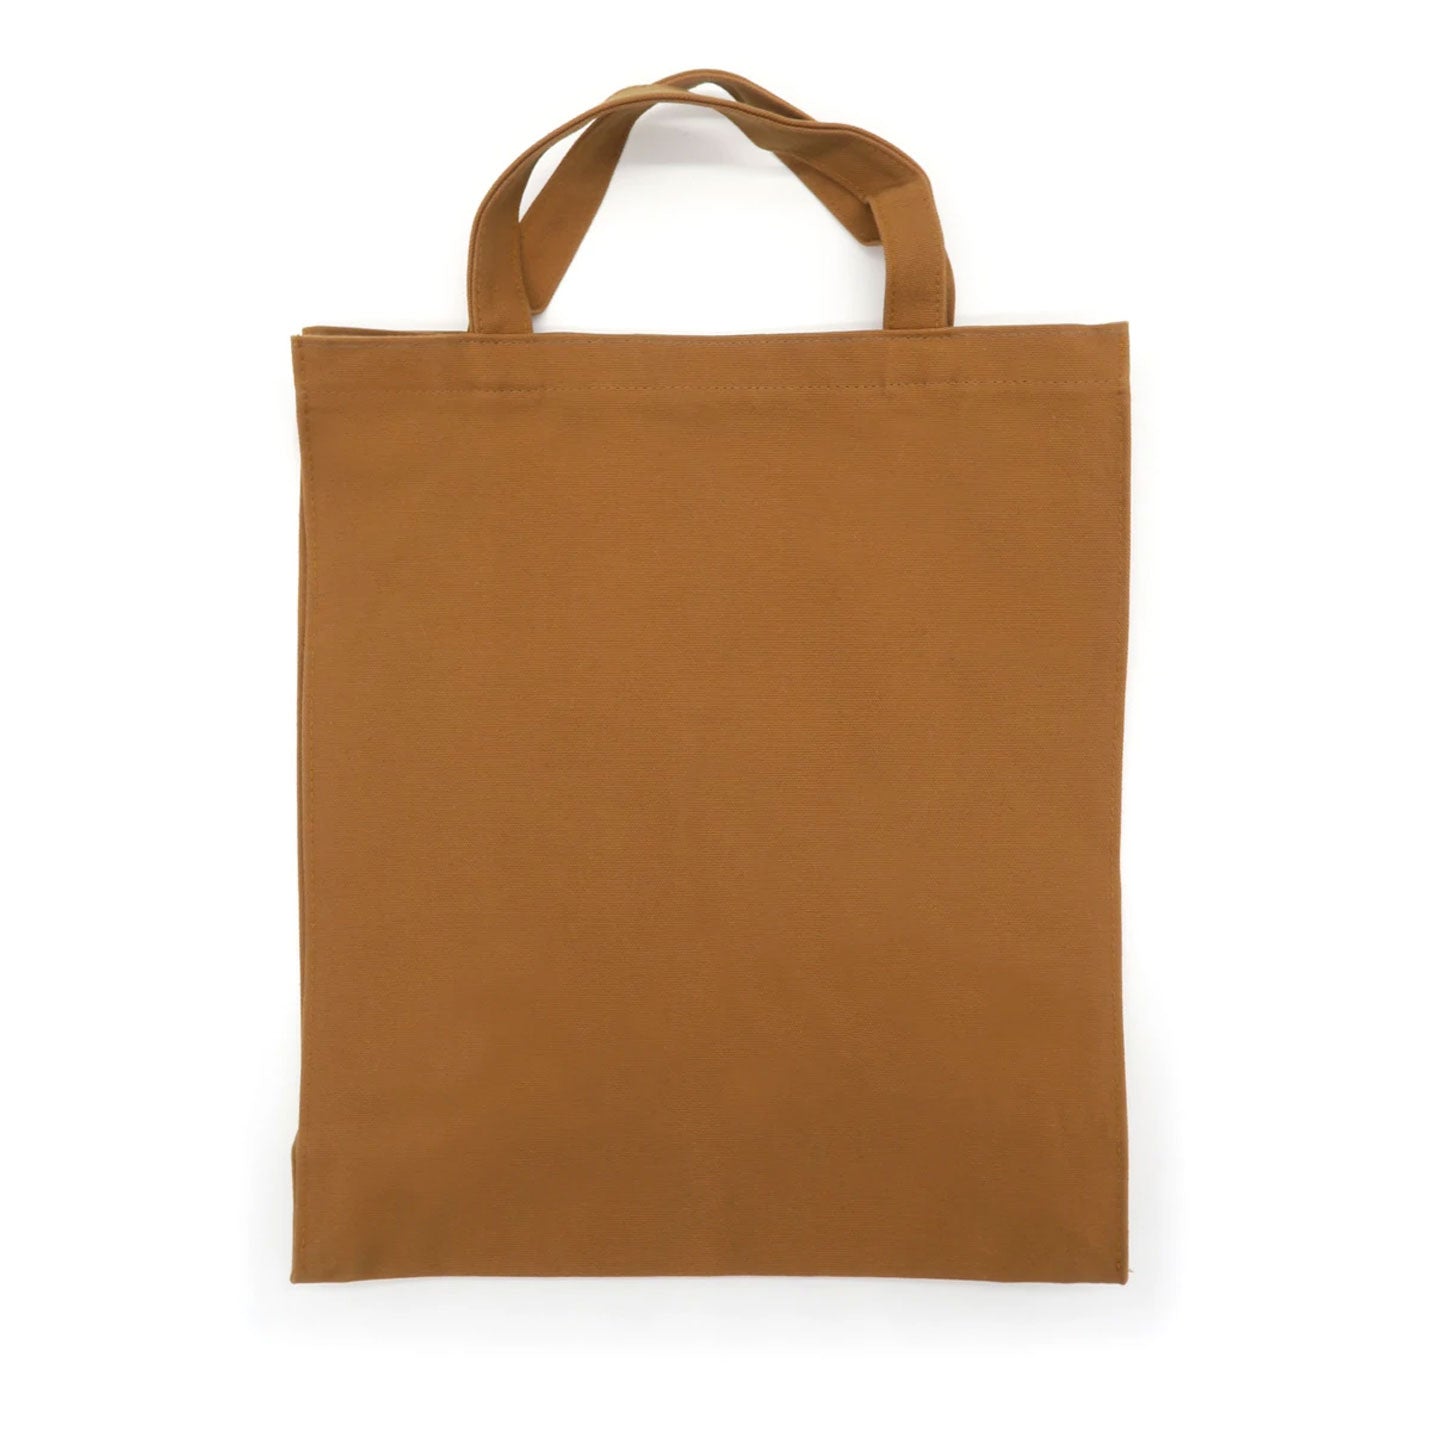 Limelight Snowmass Shopper Tote